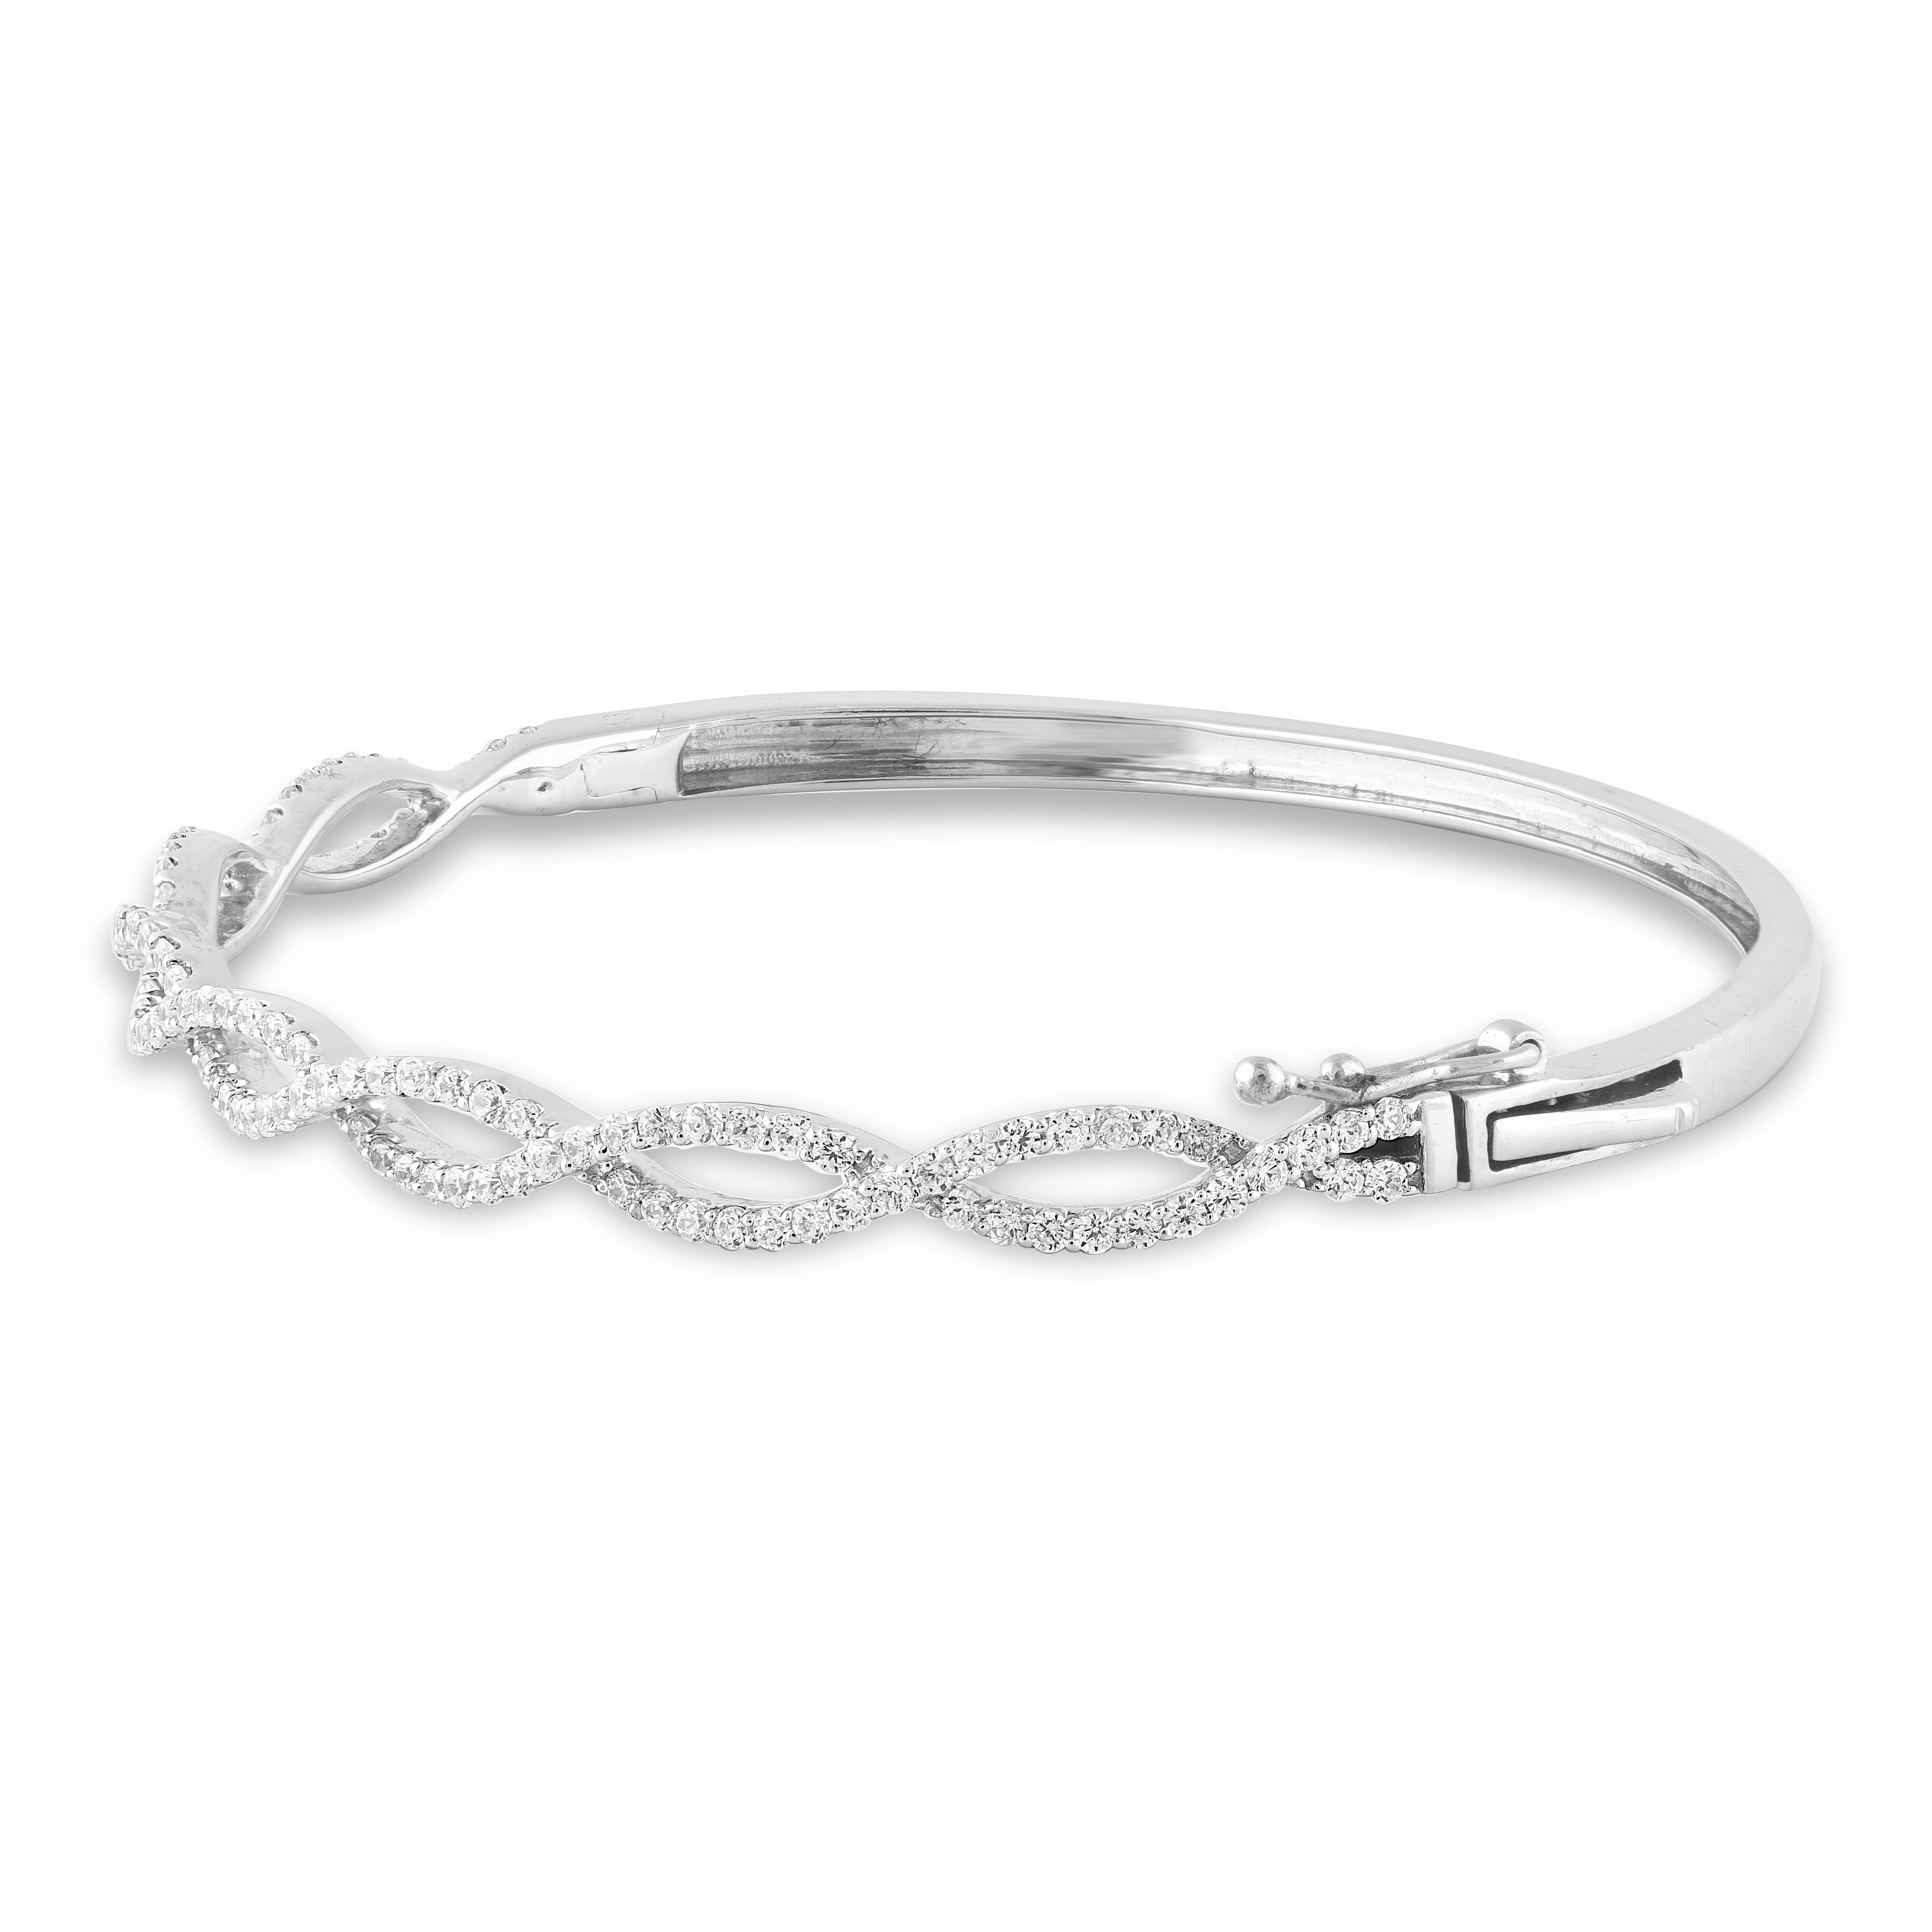 Elegant and alluring, these designer diamond tennis bracelet are perfect for your evening ensemble. Featuring 116 round brilliant-cut diamond set in prong setting and crafted by our inhouse experts in 14 Karat White Gold. The total weight of